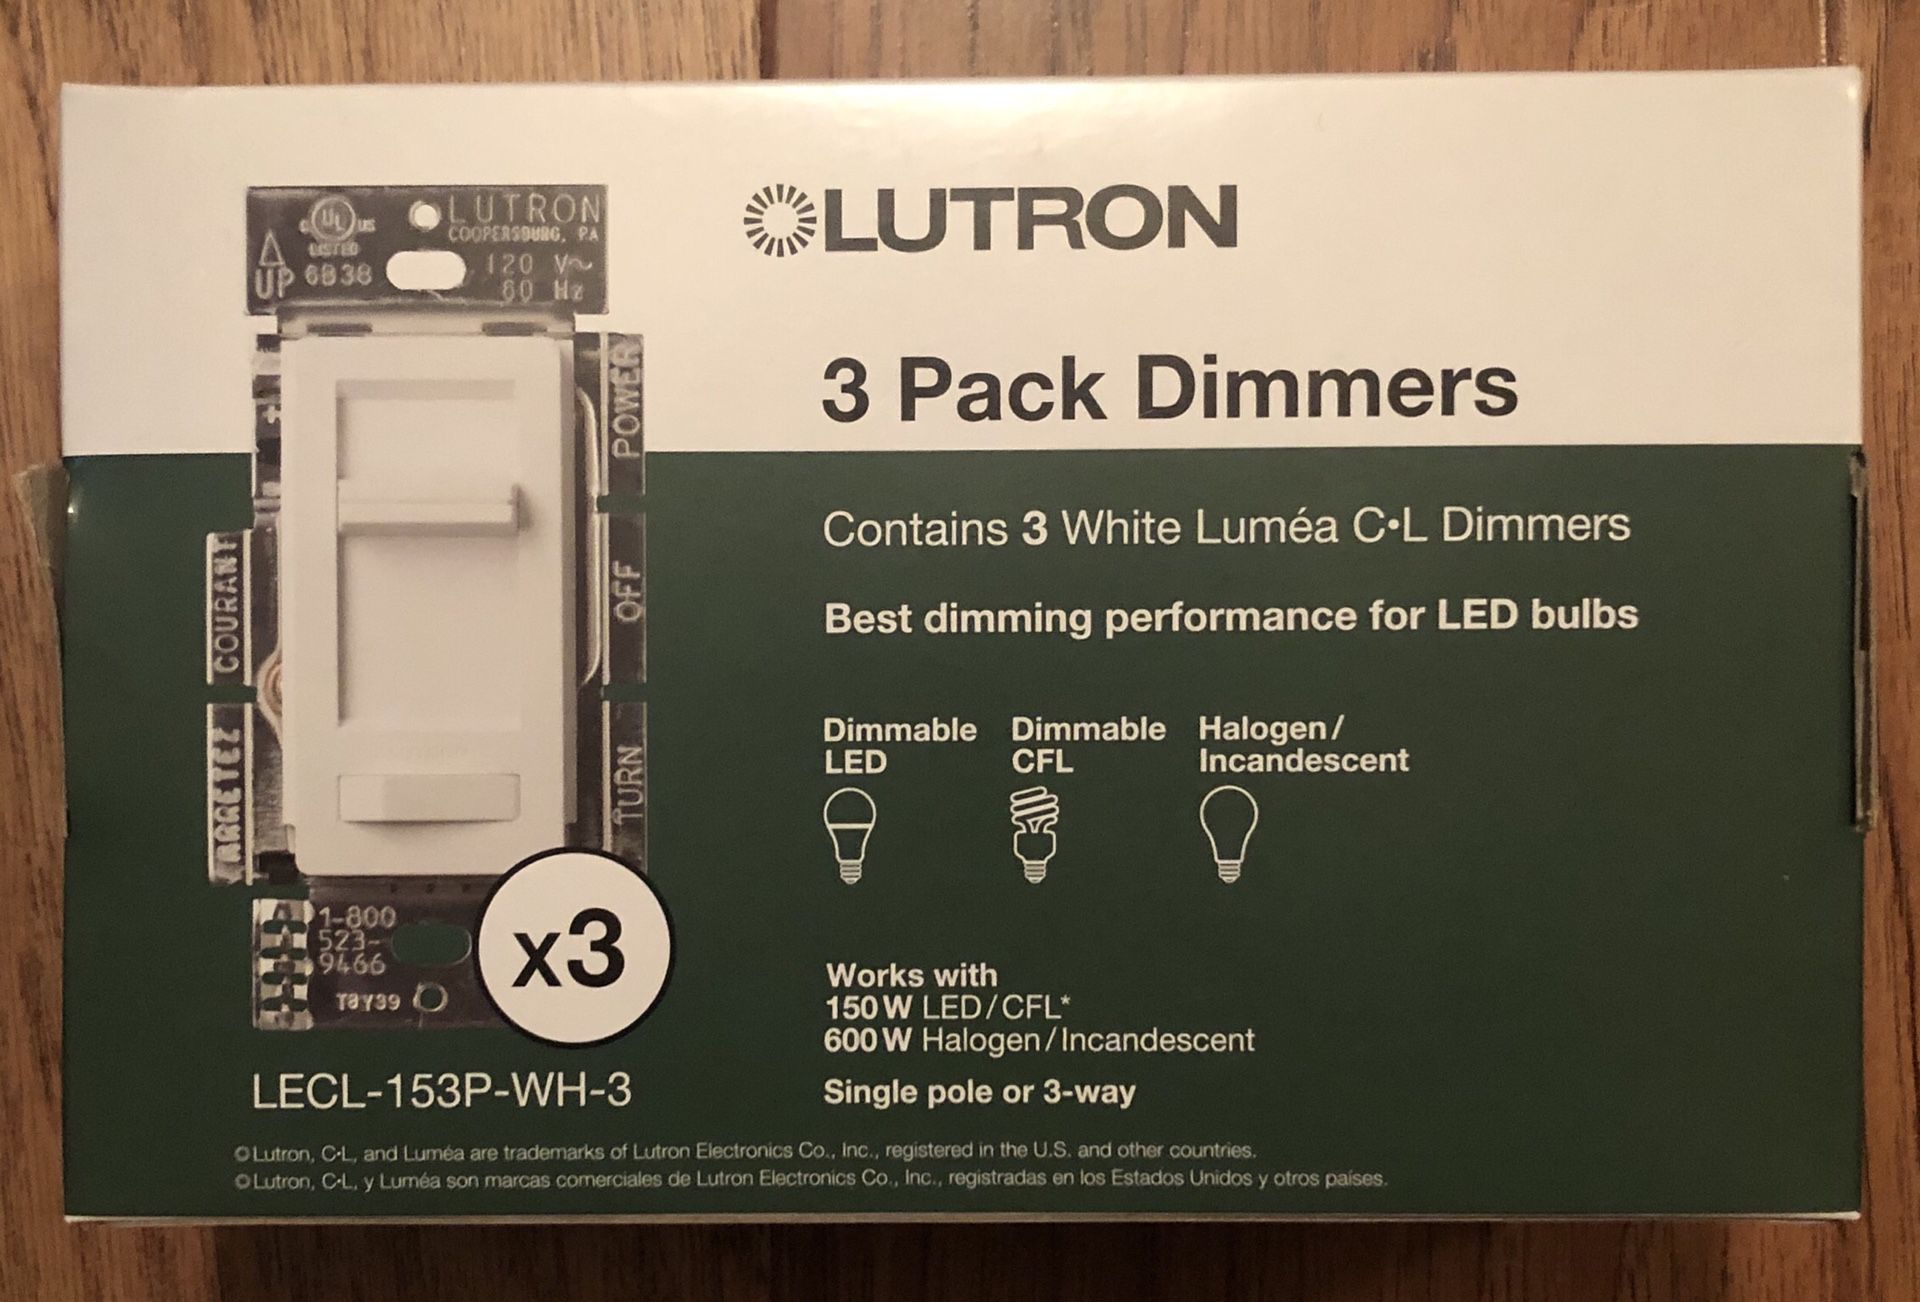 Lutron Luméa CL Dimmers 3 Pack. White.